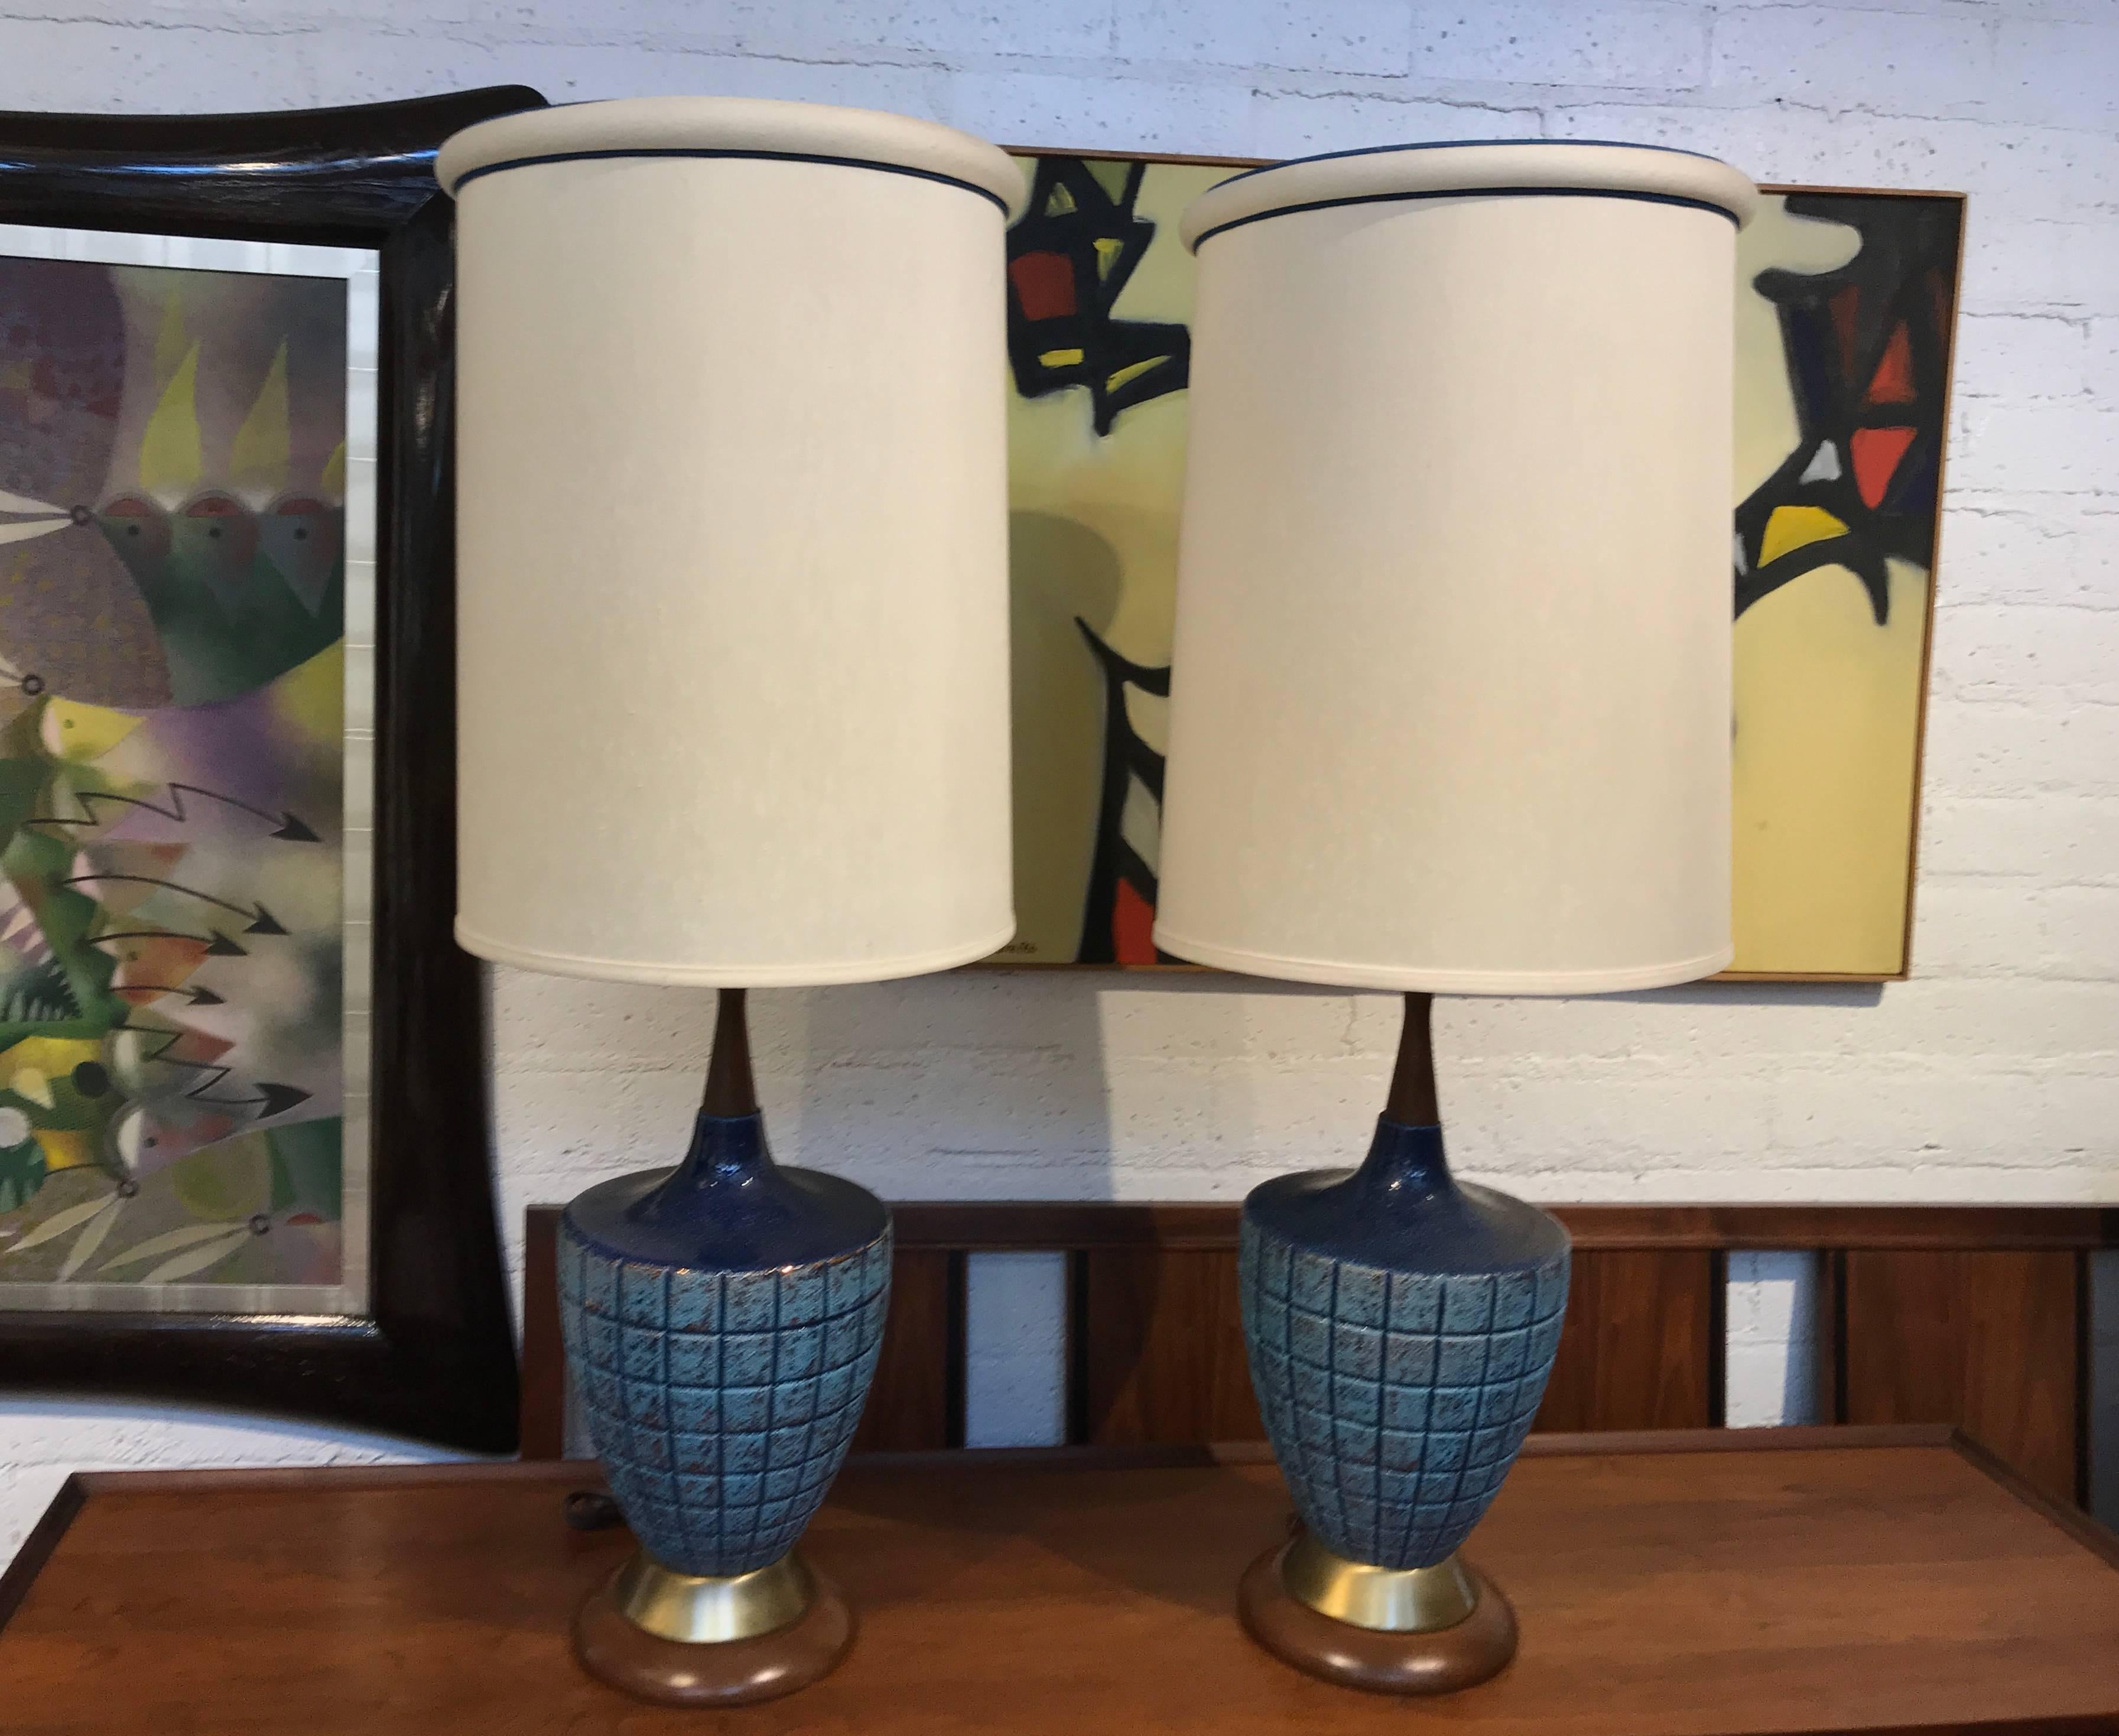 Vintage Blue Ceramic Lamps with Their Original Shades  1